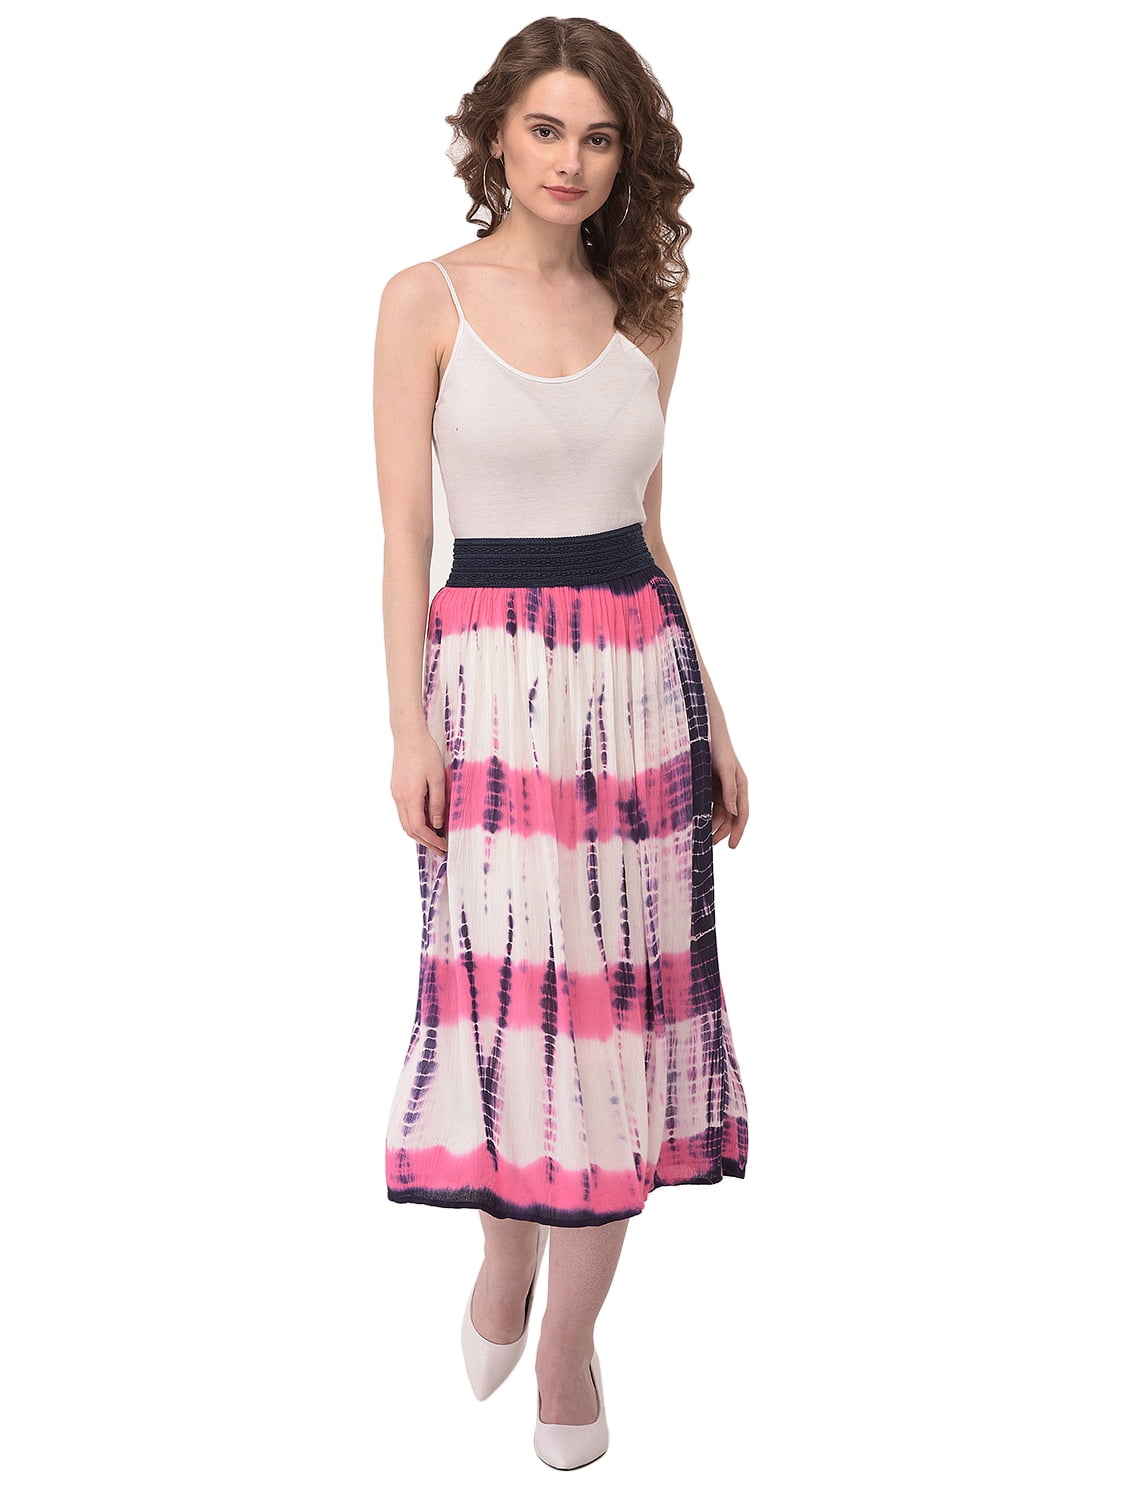 Oussum - Tie Dye Womens Skirts Rayon Solid Midi Skirt for Ladies Casual ...